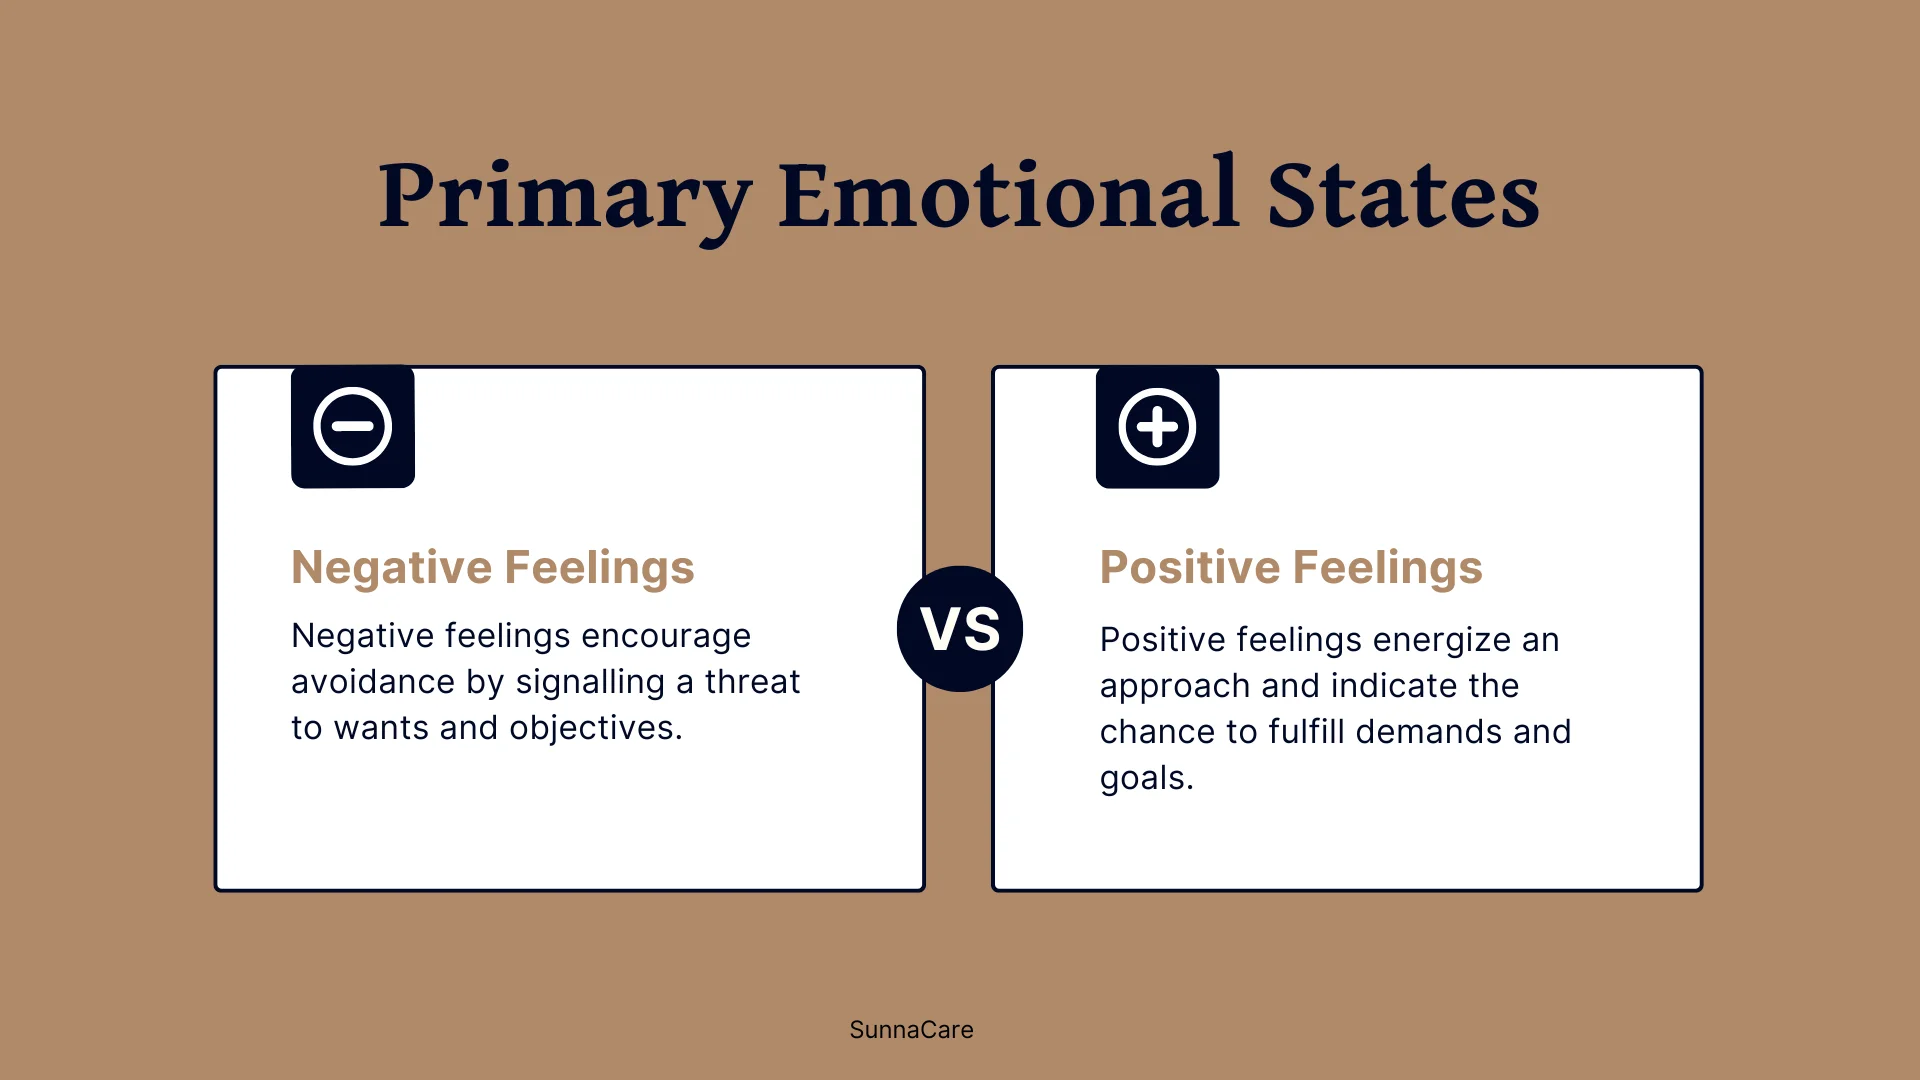 An infographic explaining the two primary emotional states